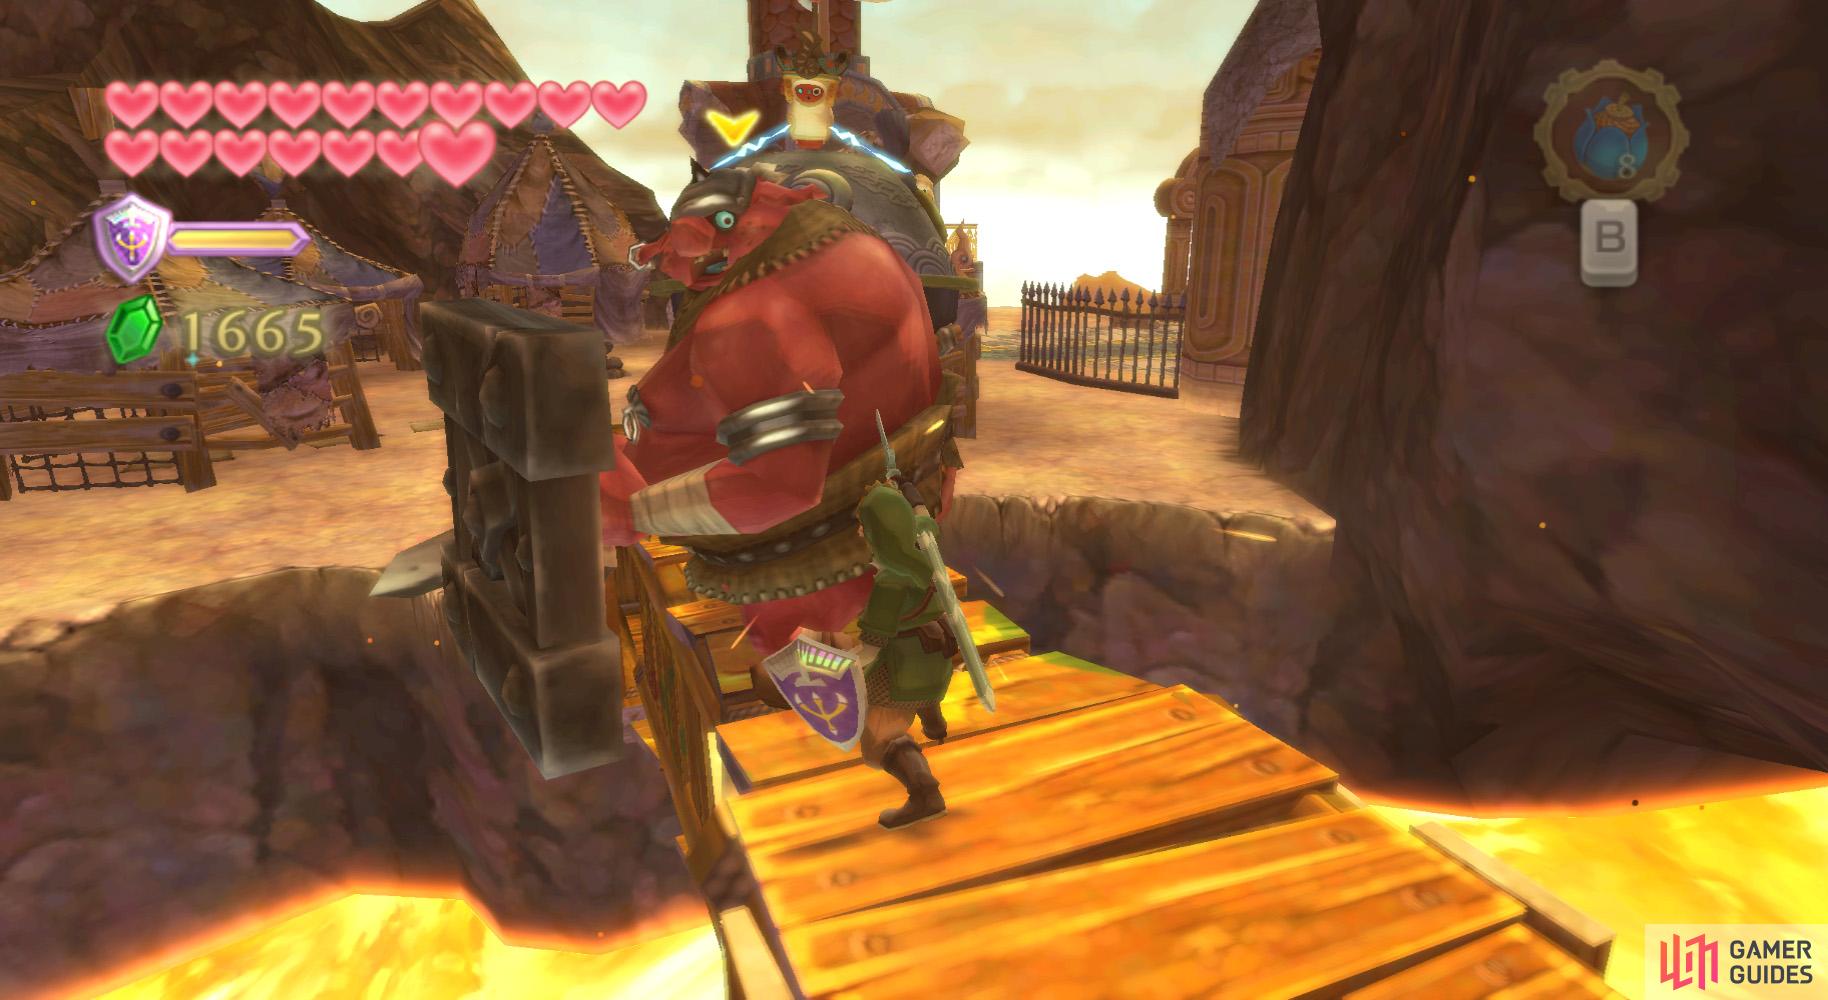 After jumping over a Moblin, if they turn around, you can back off and let Scrapper grab their attention.